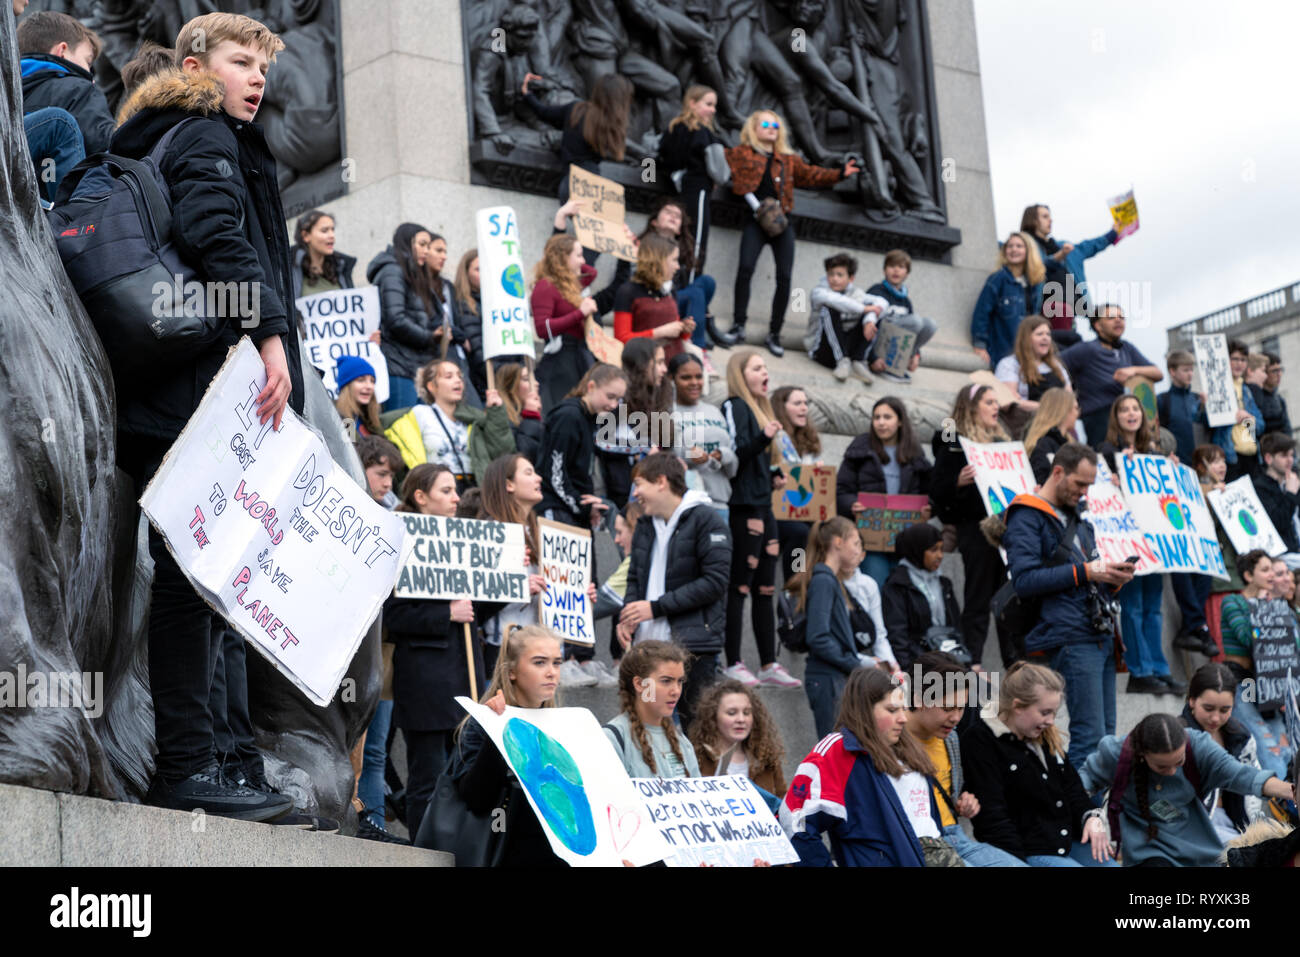 London, UK. 15th Mar, 2019. Group of youths with banners and flags strike for climate change outside Trafalgar Square. Credit: AndKa/Alamy Live News Stock Photo